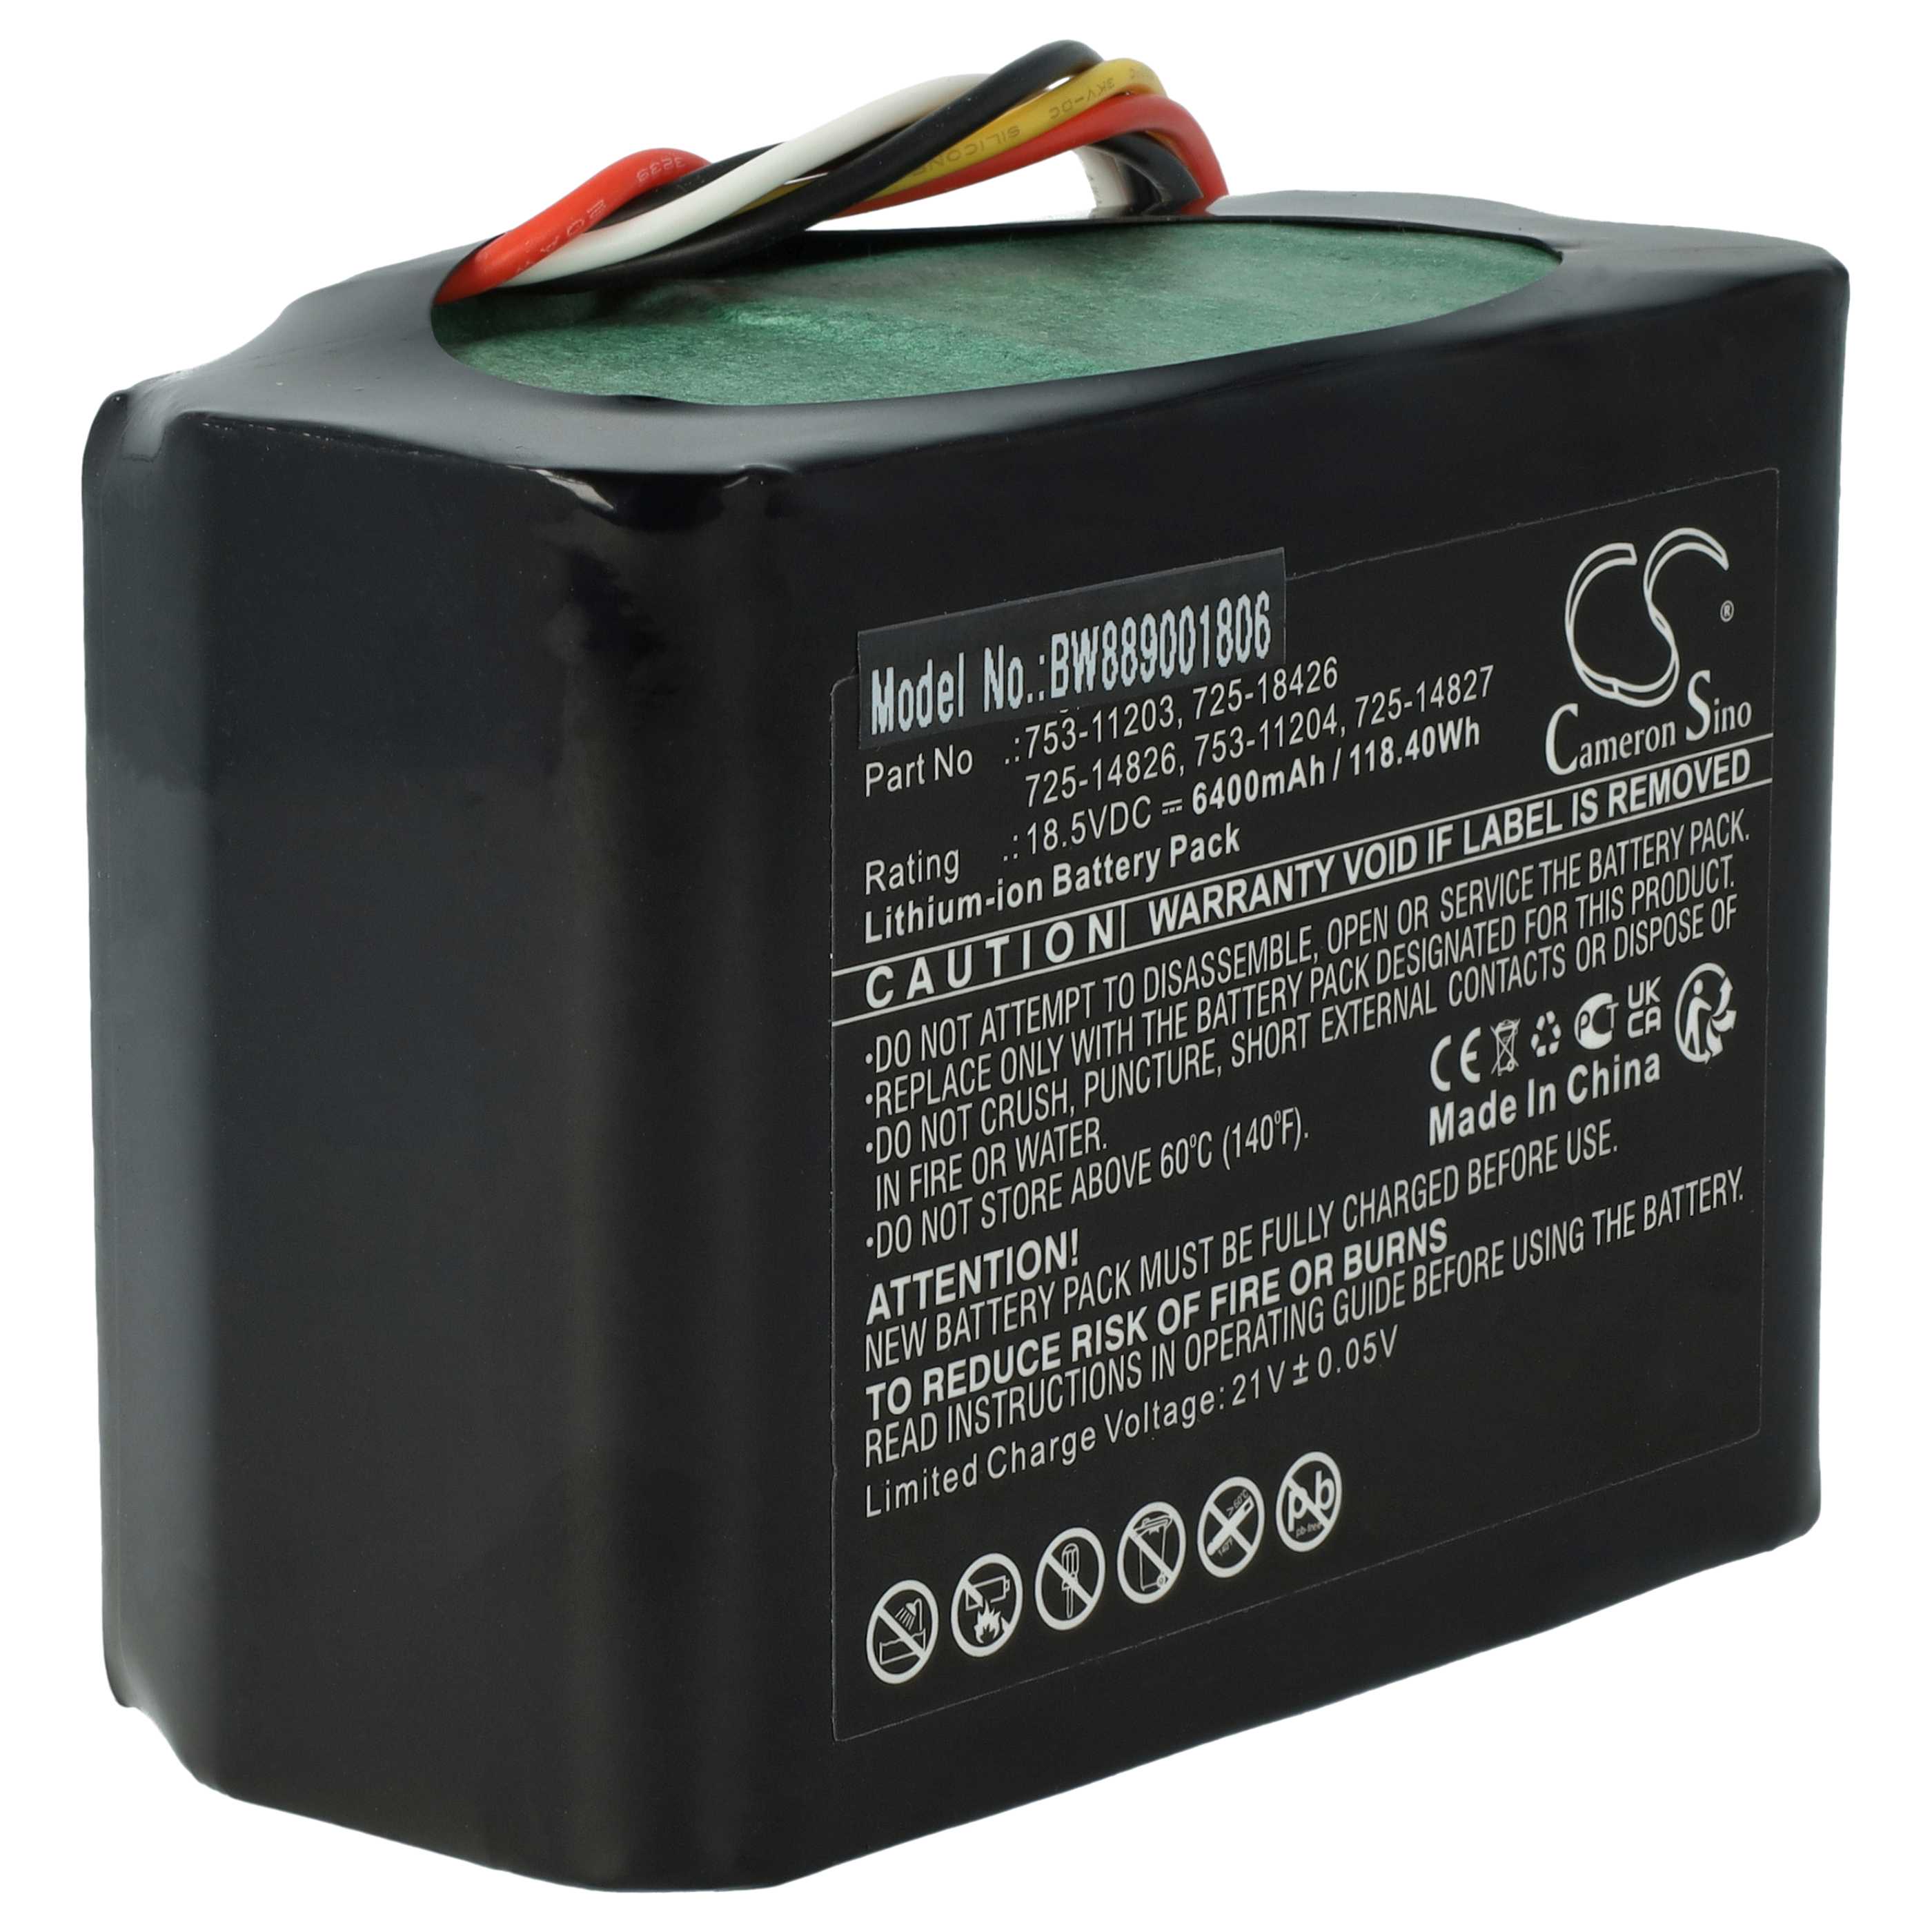 Lawnmower Battery Replacement for CubCadet 753-11203, 725-14826, 725-14827, 725-18426 - 6400mAh 18.5V Li-Ion